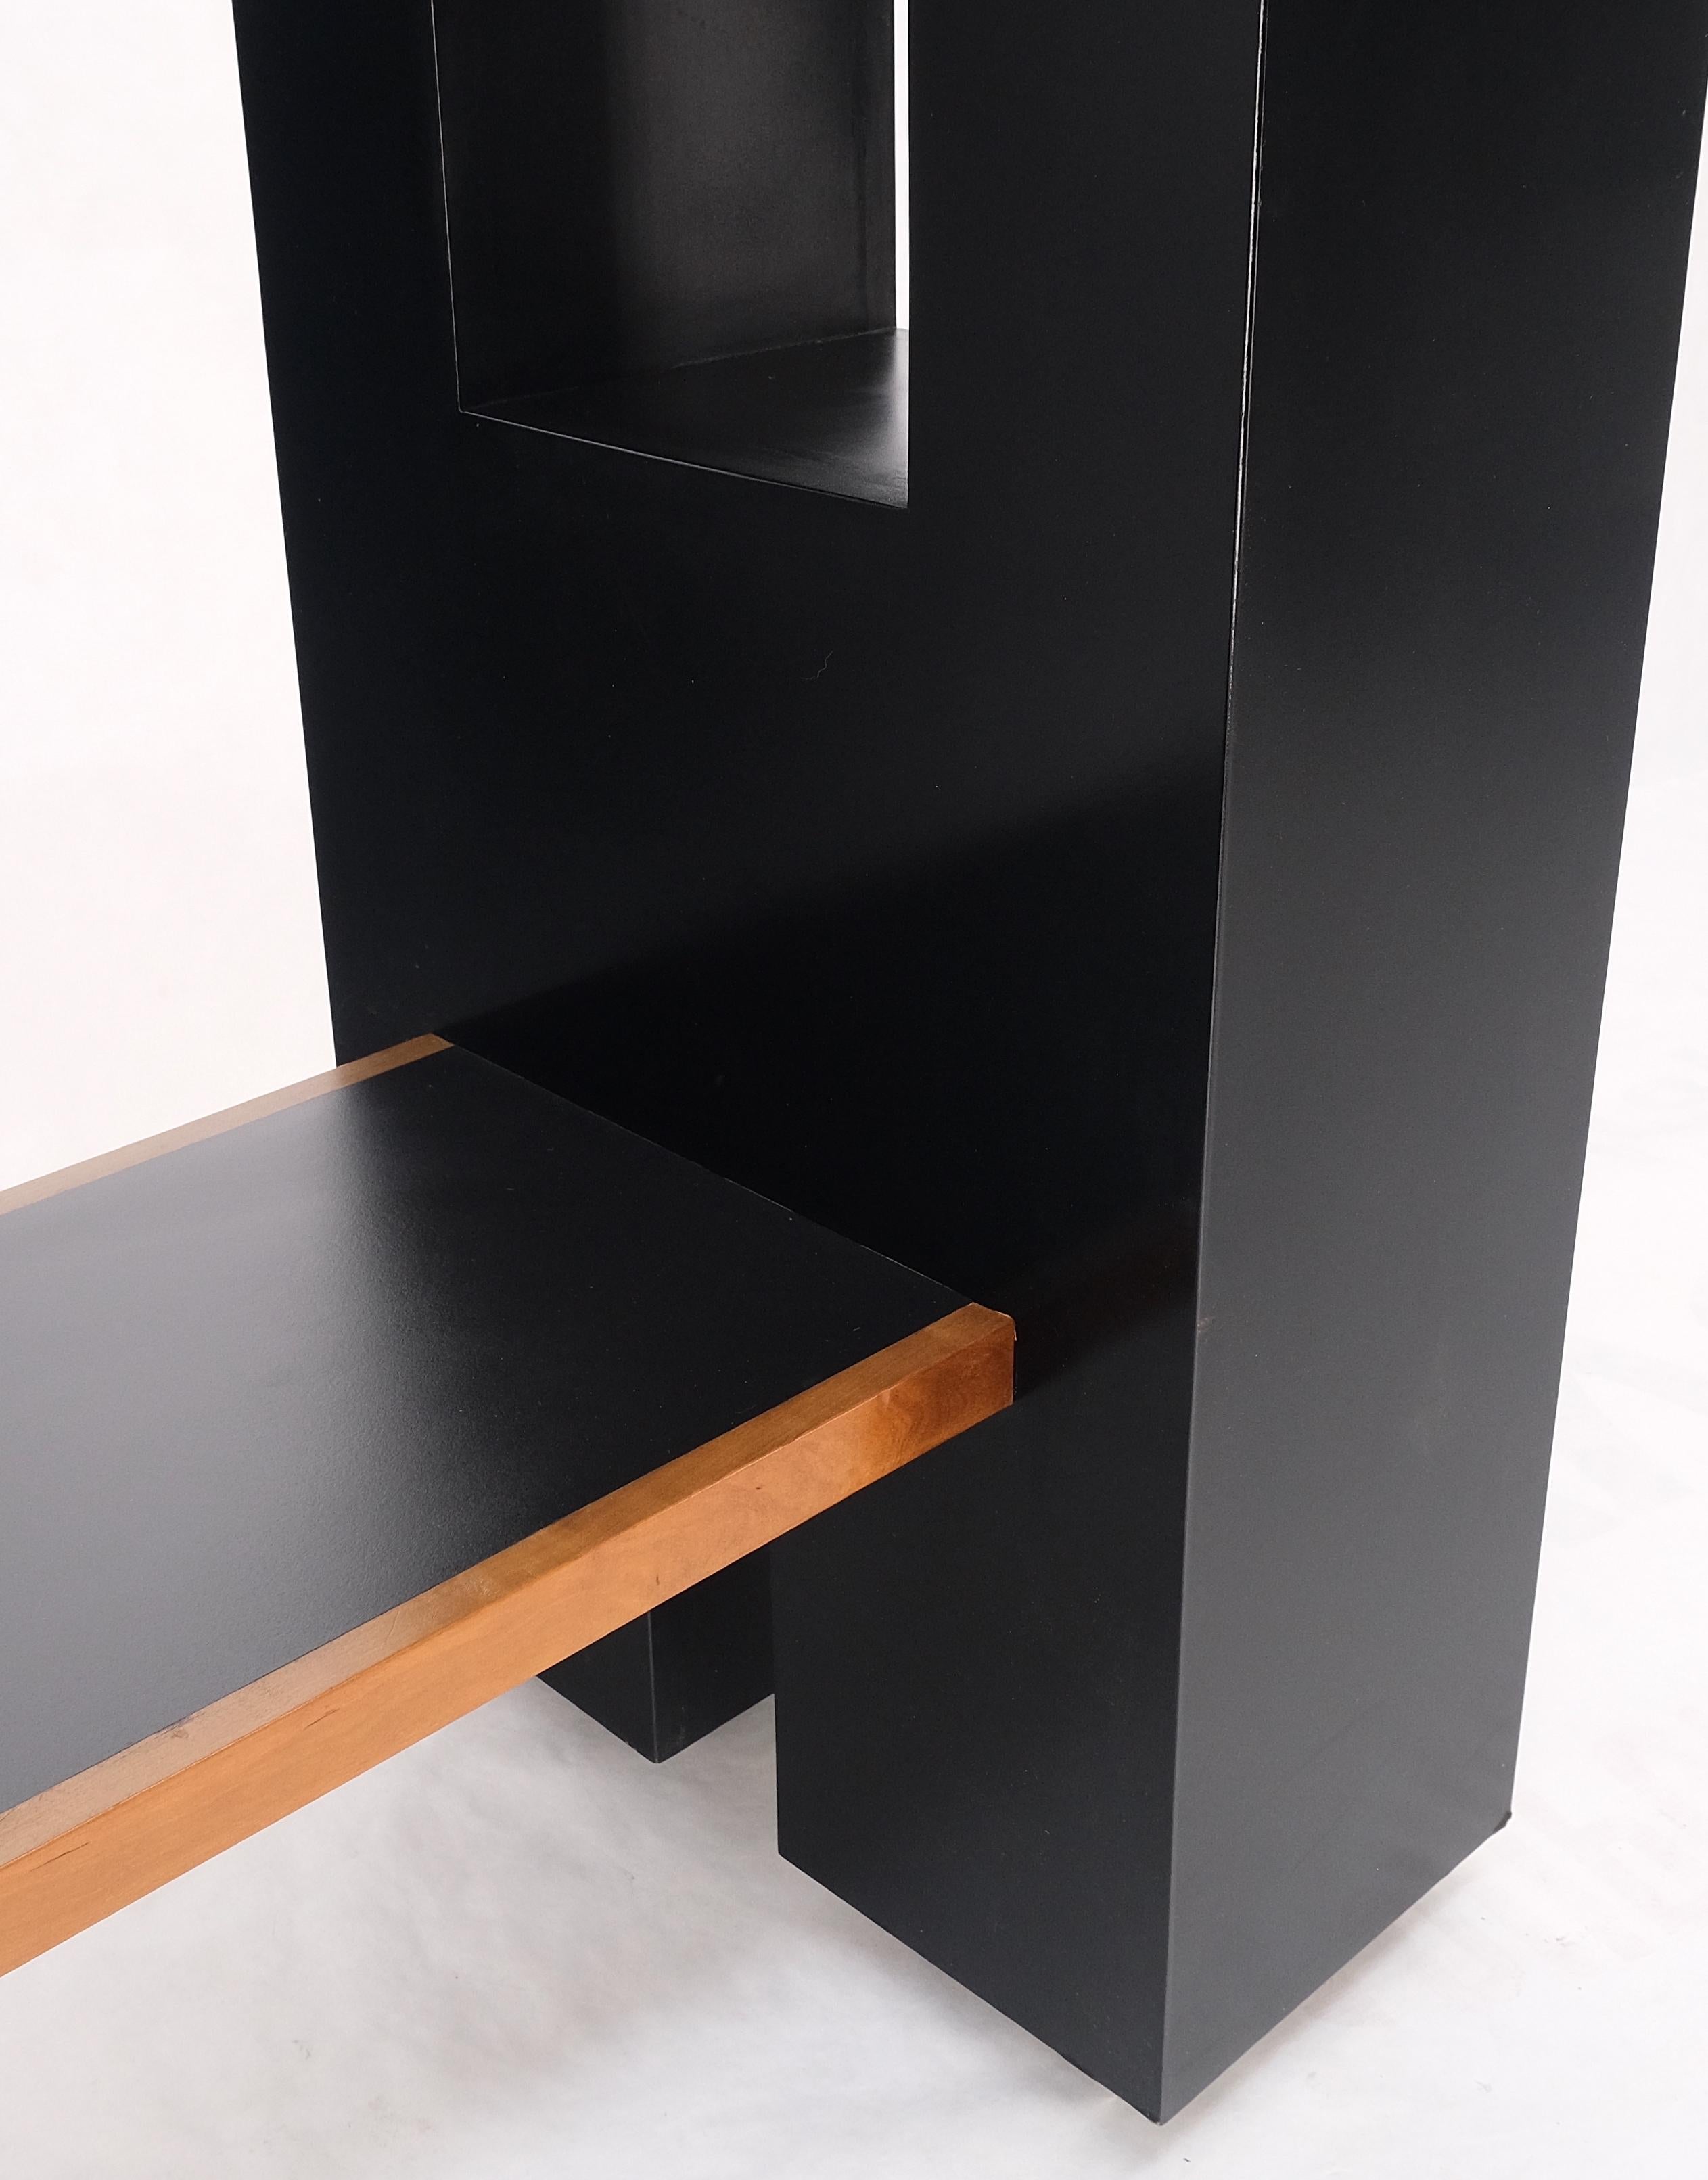 Black Laminate Bar Countertop Heigh Hall Table Console Custom Built Modern In Good Condition For Sale In Rockaway, NJ